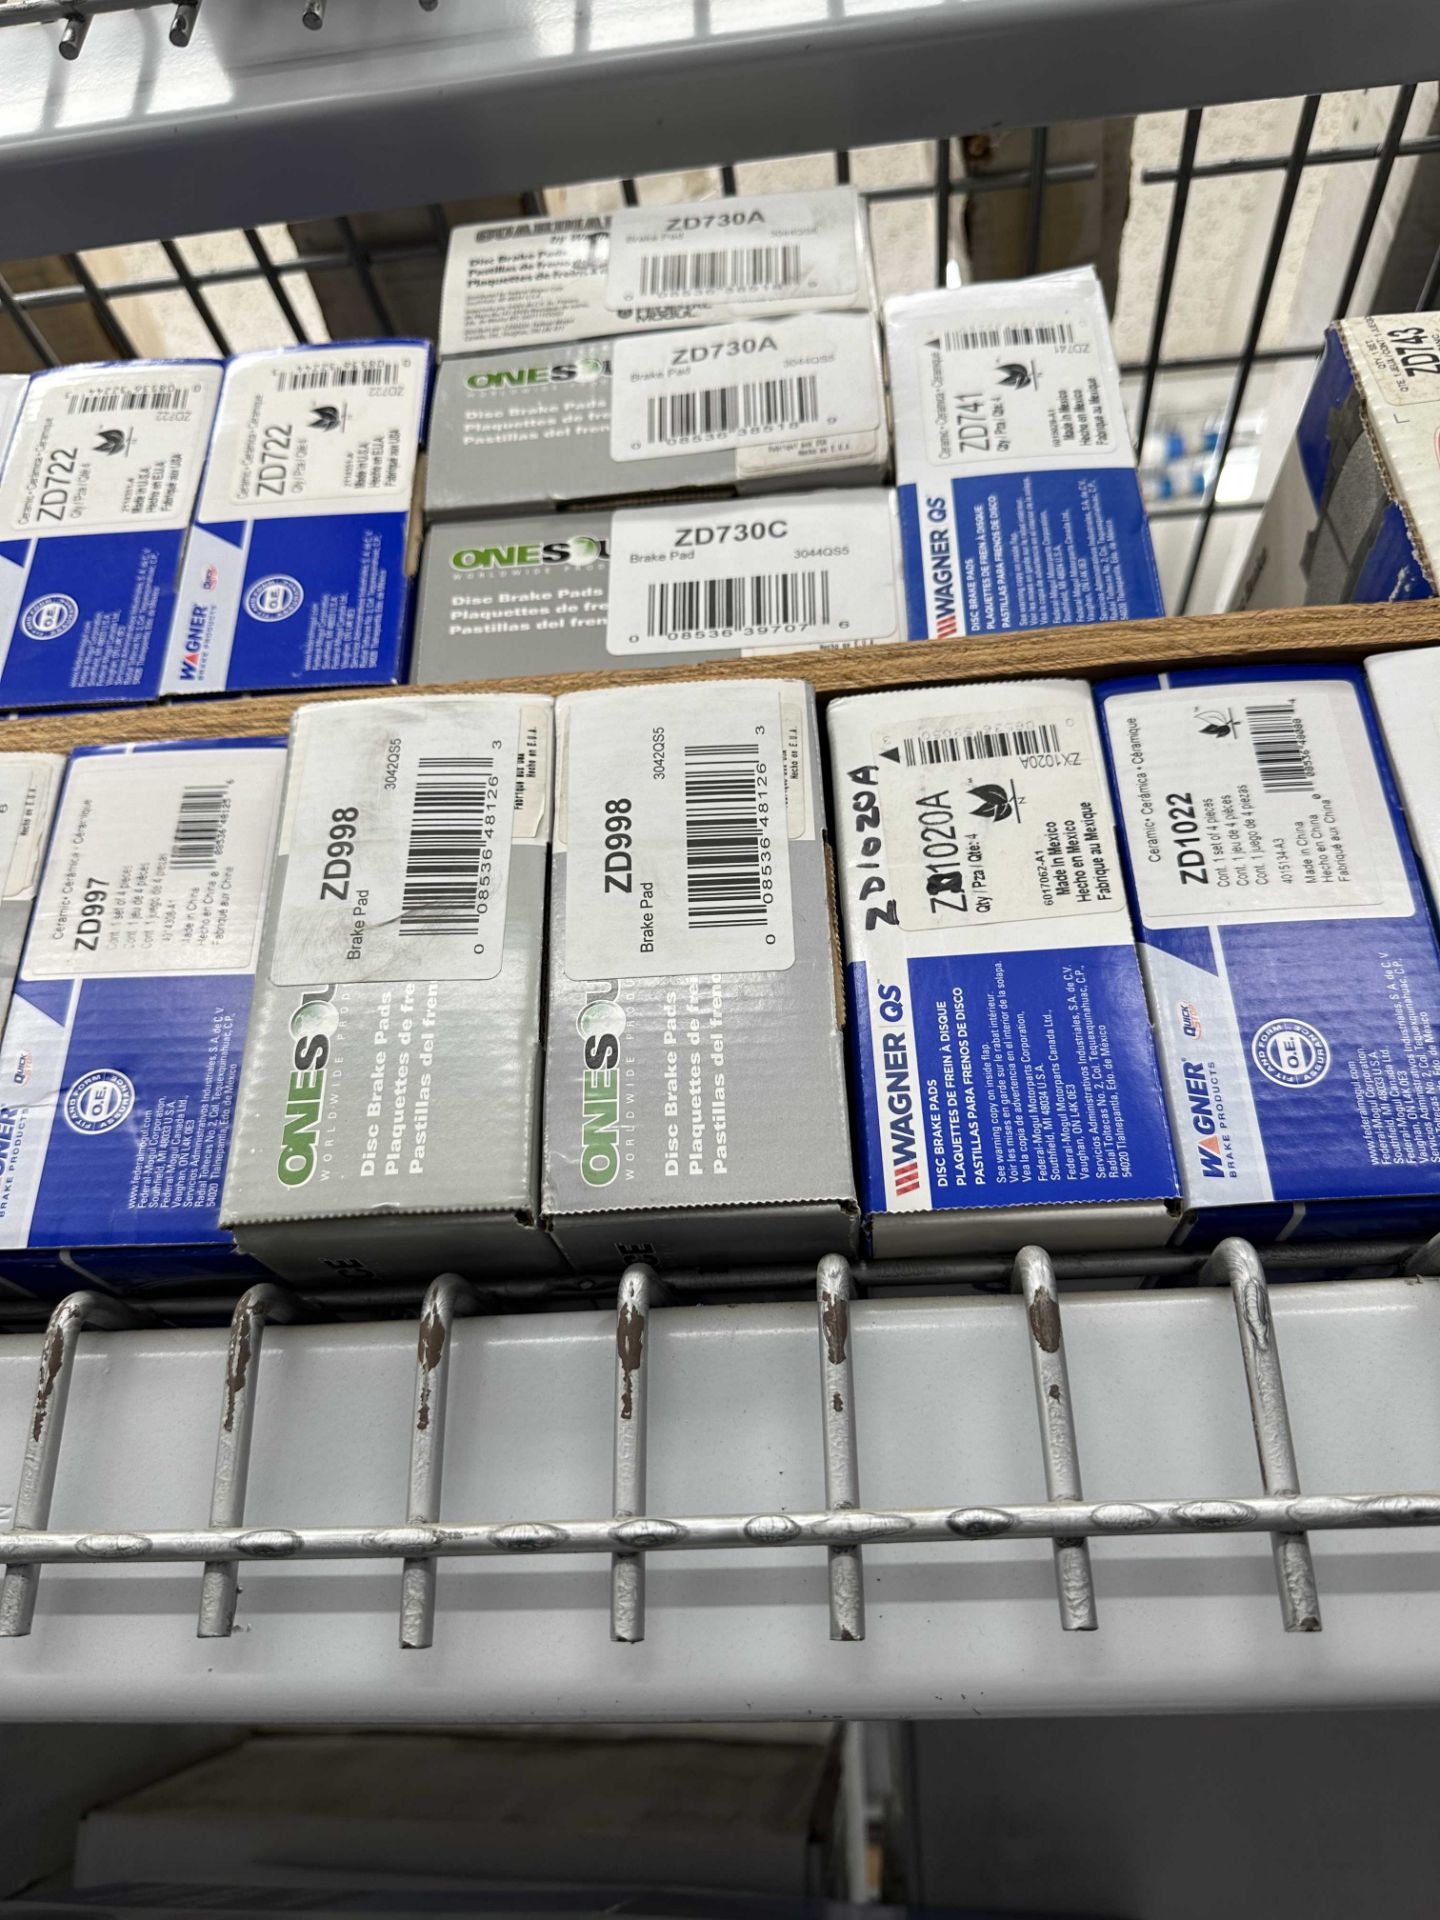 {LOT} Wagner ZD & Asst. Brake Pads Appx. (162) @ 2800 Wholesale Cost on 2 1/2 Shelves - Image 2 of 2